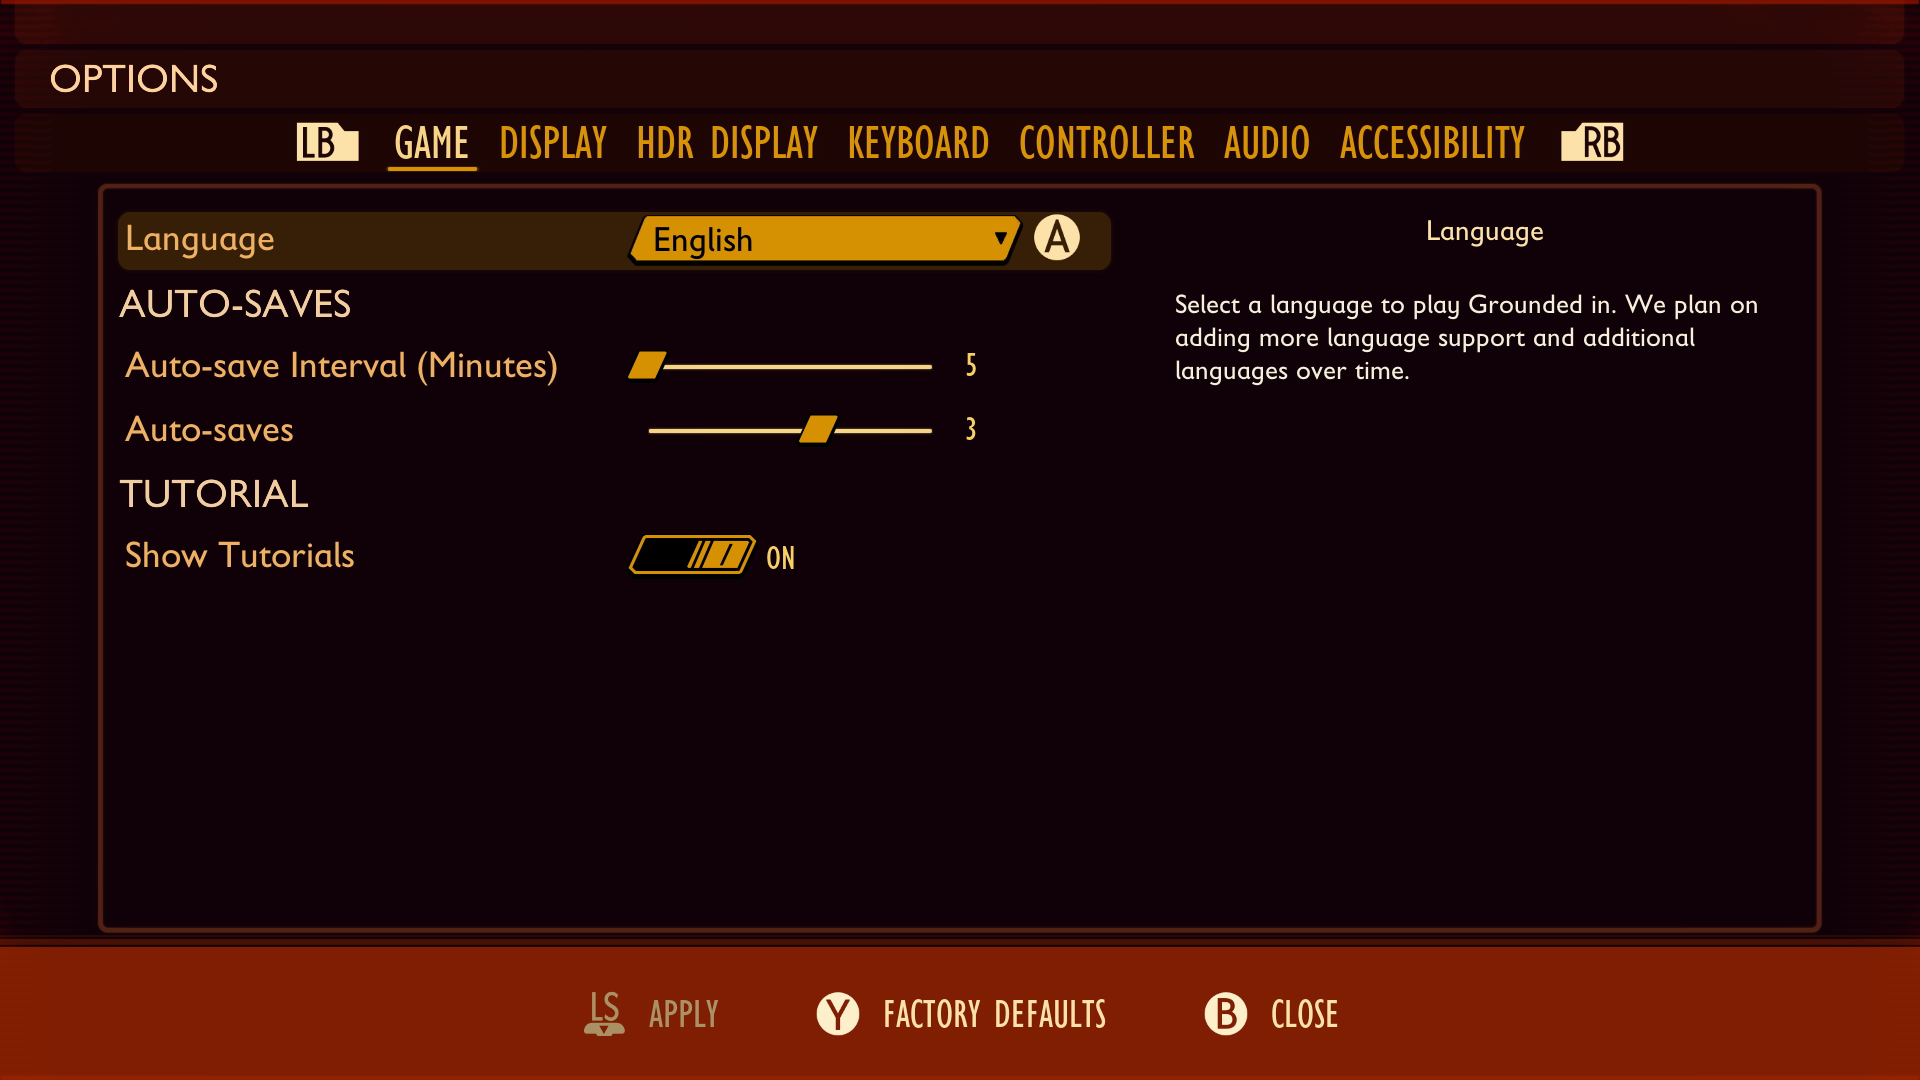 A screenshot of the game options menu in Grounded. The game provides two auto-save options. One is the auto-save interval in minutes. The player has it set to 5. The other is auto-saves, which is set to 3. The option description reads, "The number of past auto-saves to keep, for each playthrough. Old auto-saves will begin to be overwritten once your auto-saves count has reached this number."